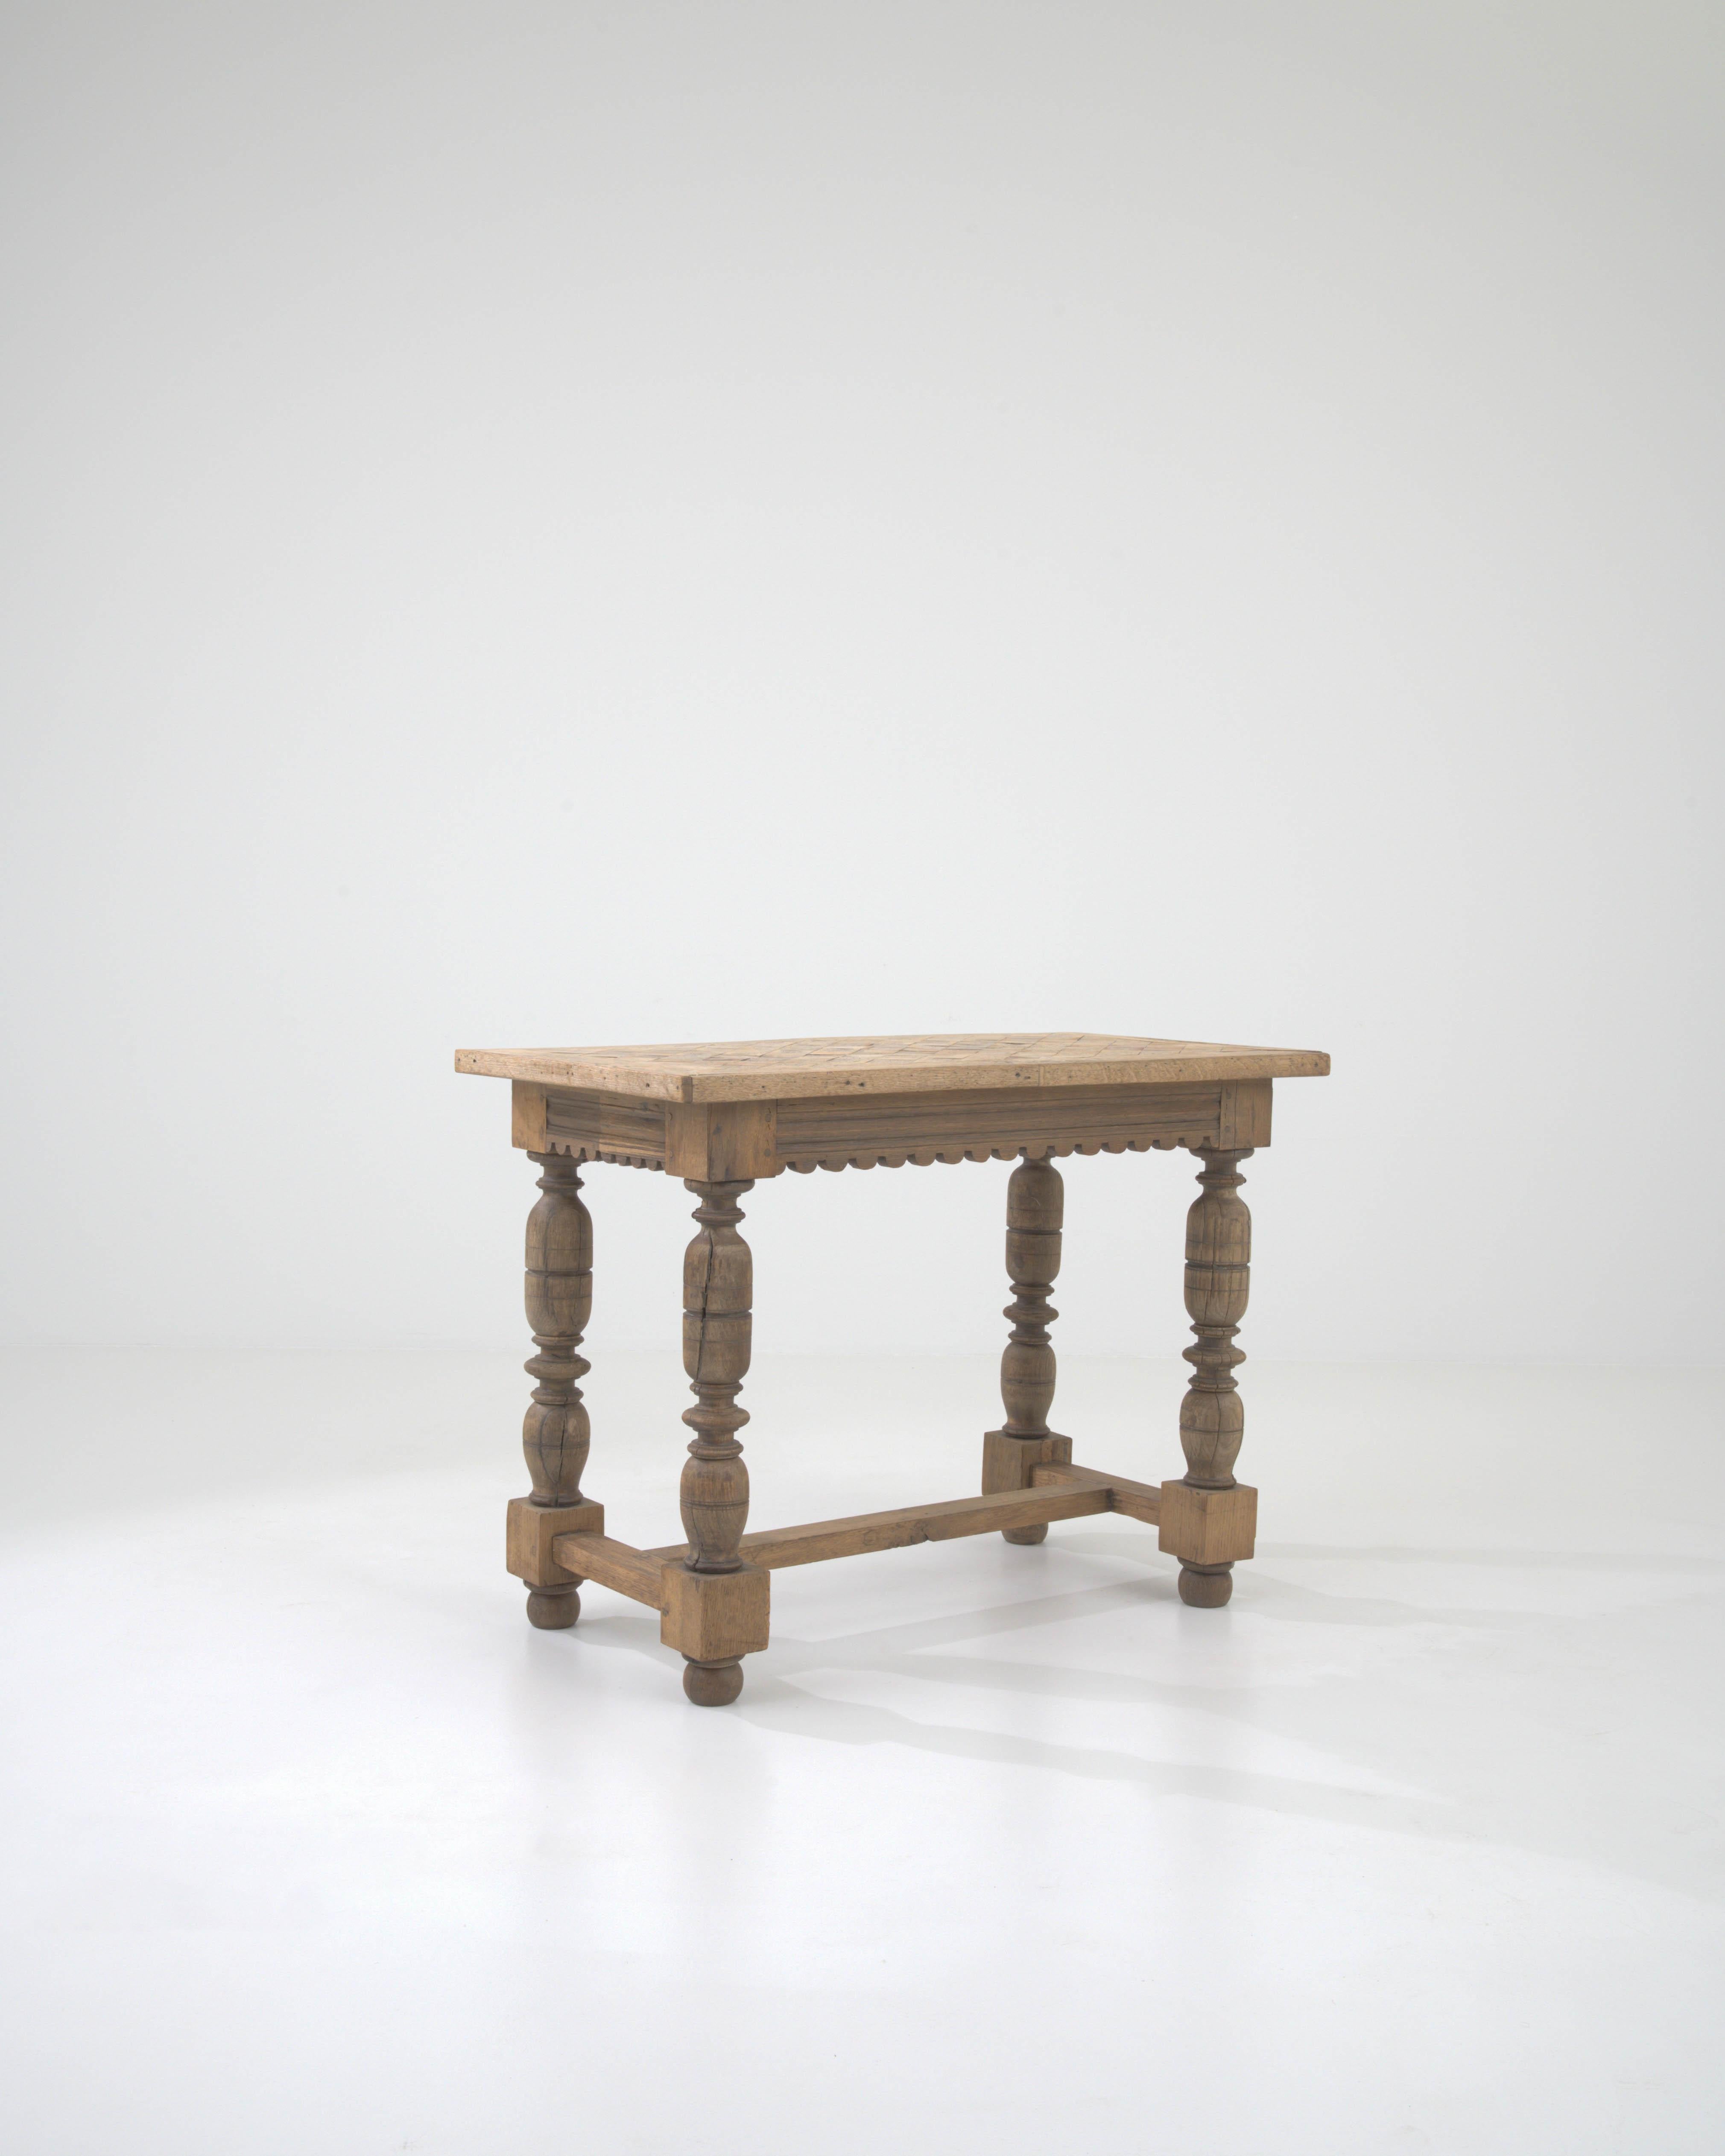 Transport yourself to the 19th century with this exquisite Belgian Wooden Side Table, a testament to the artistry of handcrafted furniture. Standing at 29.4 inches in height, it features meticulous hand-carvings that adorn the entire piece,